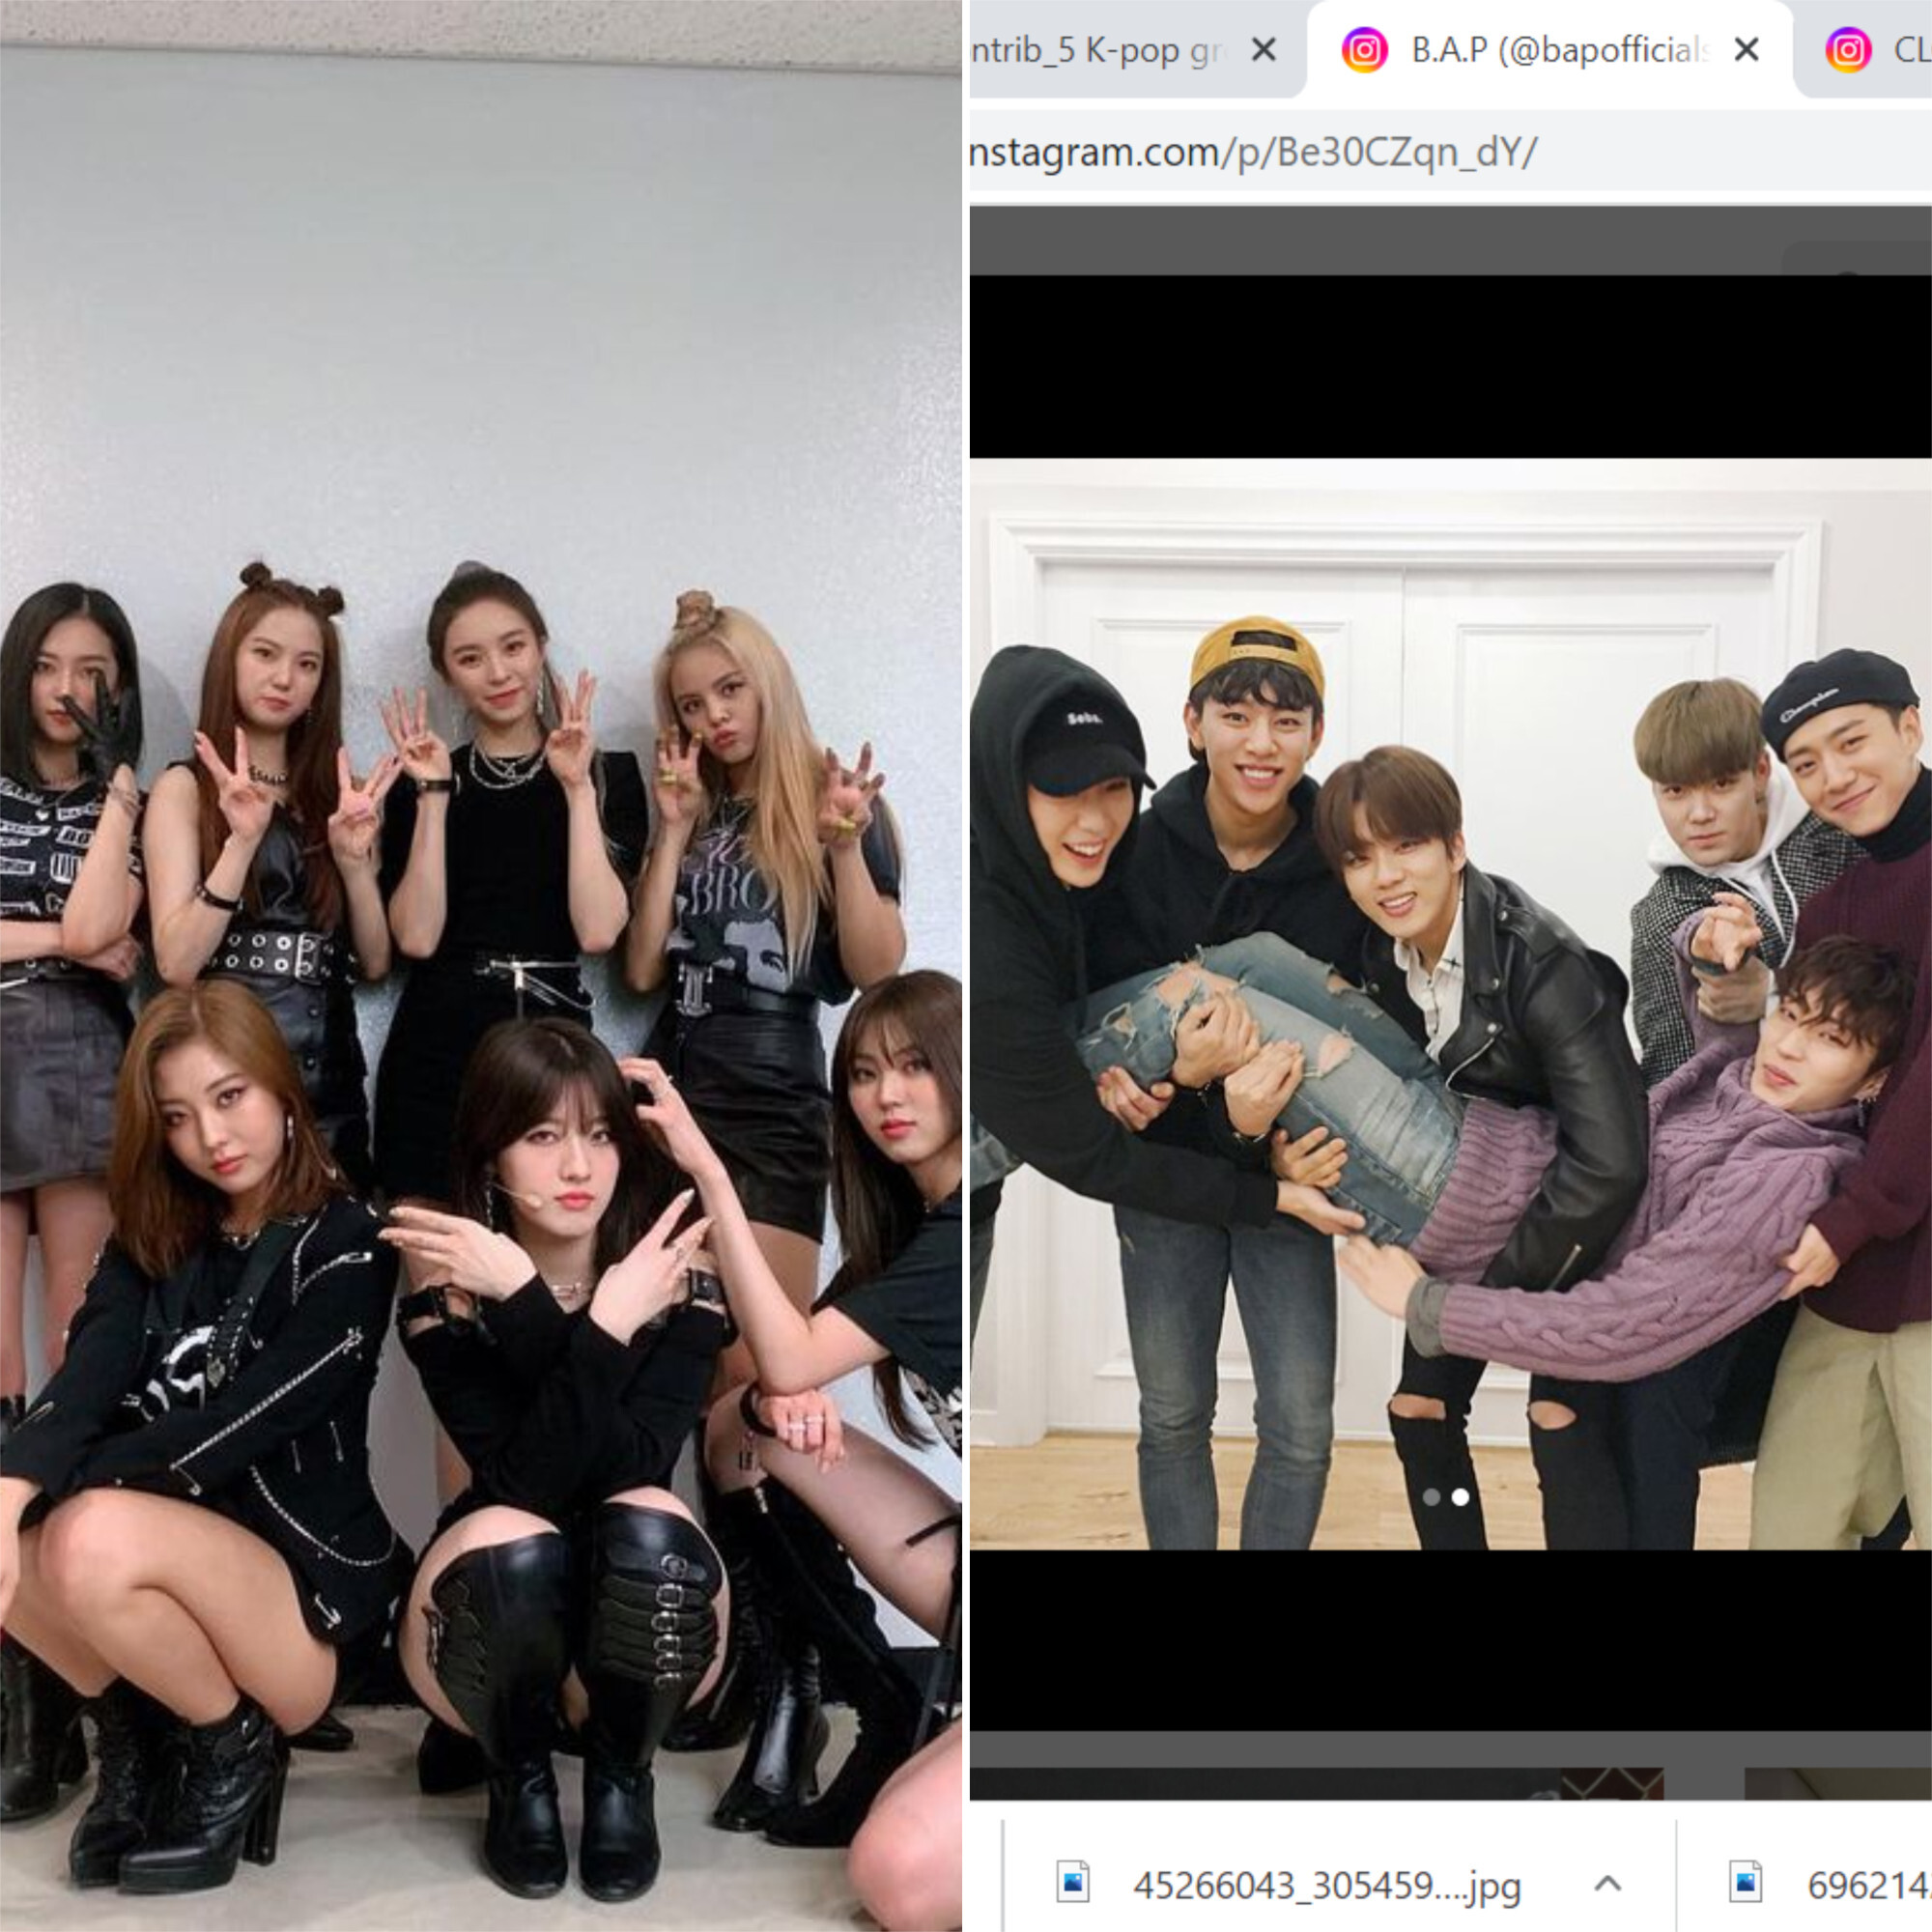 K-pop bands CLC and B.A.P had potential, but were arguably mismanaged by their companies. Photos: @cube_clc_official, @bapofficials/Instagram